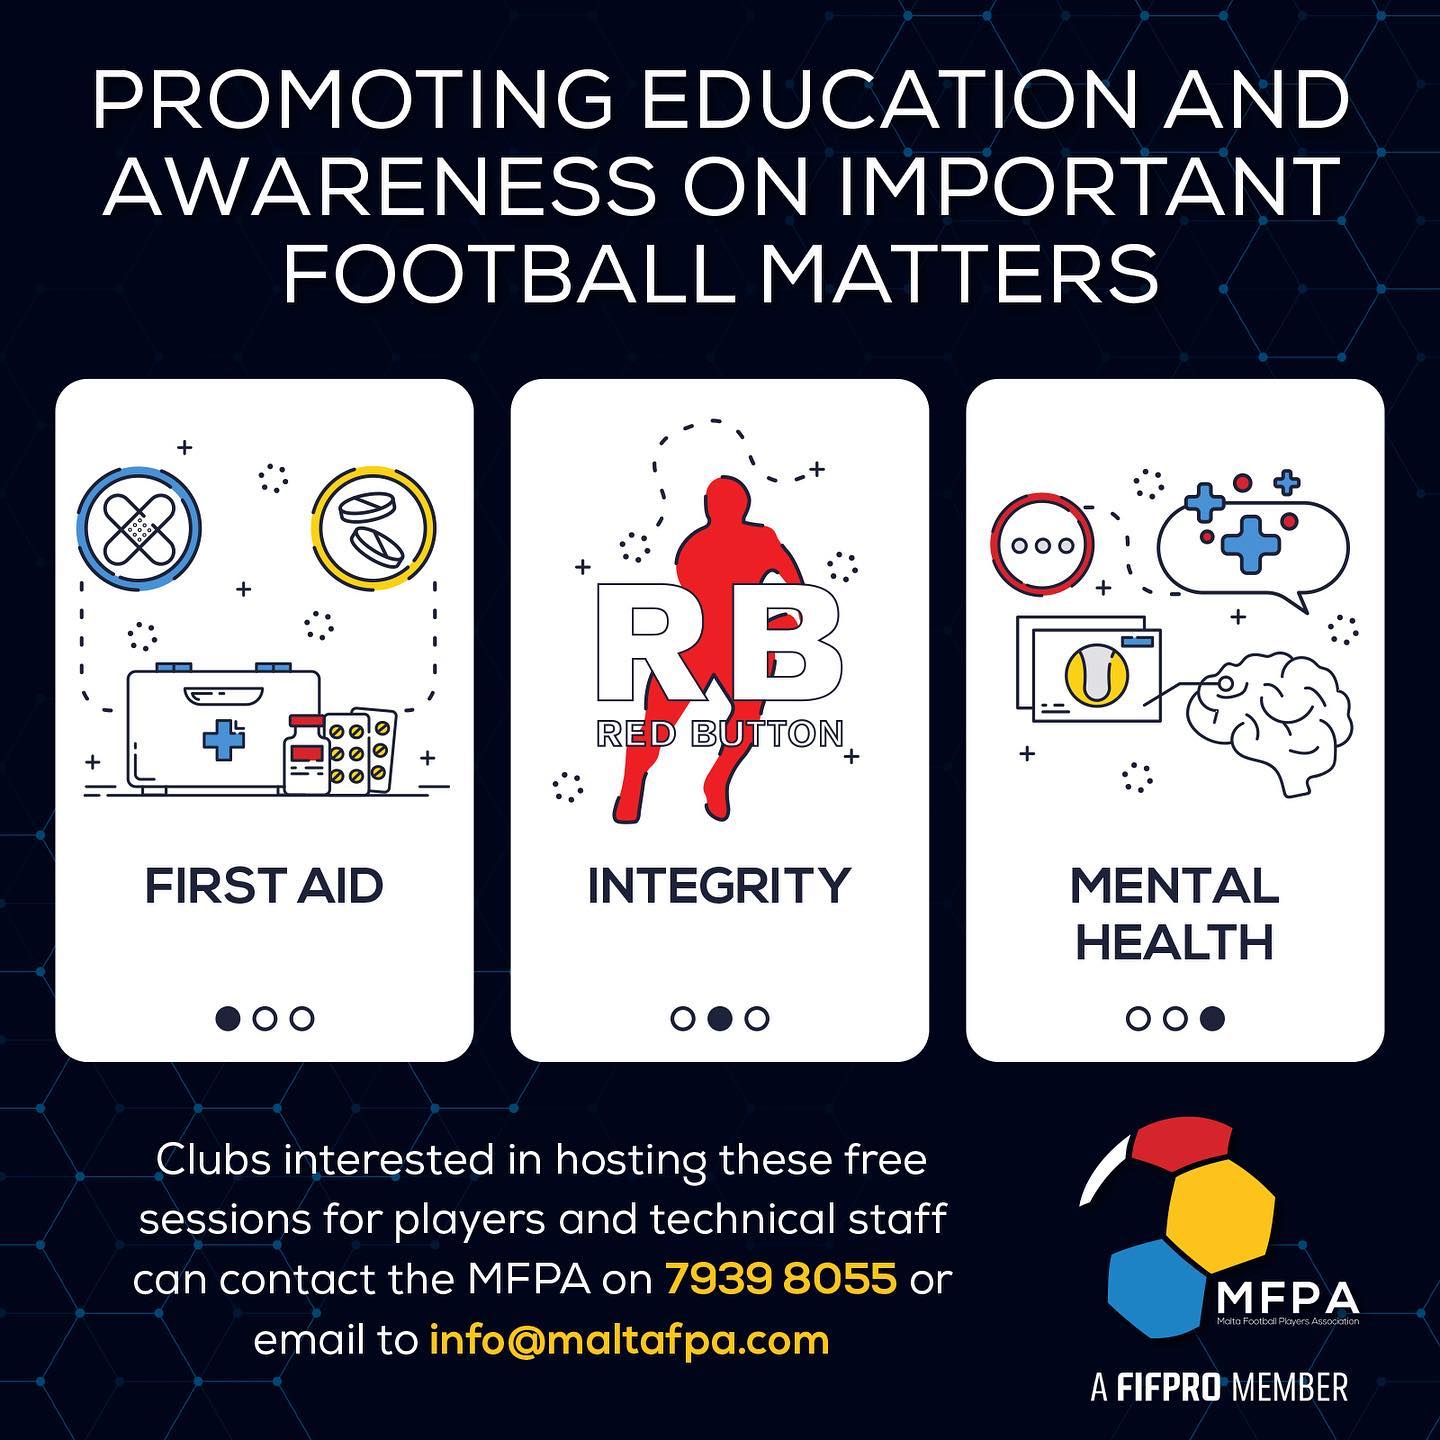 MFPA reaching out to clubs to raise awareness on first aid, integrity and mental health